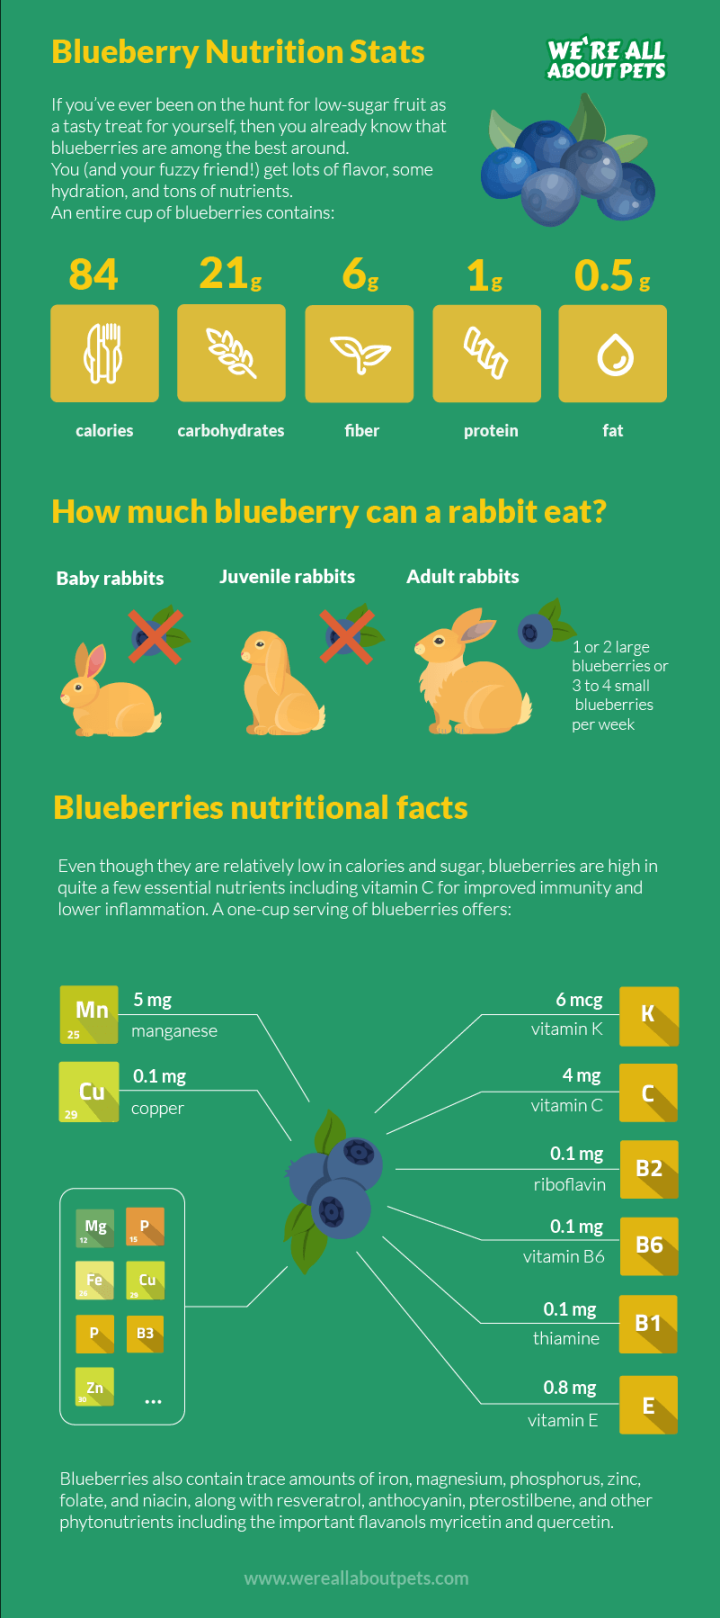 Can Rabbits Eat Blueberries? - We